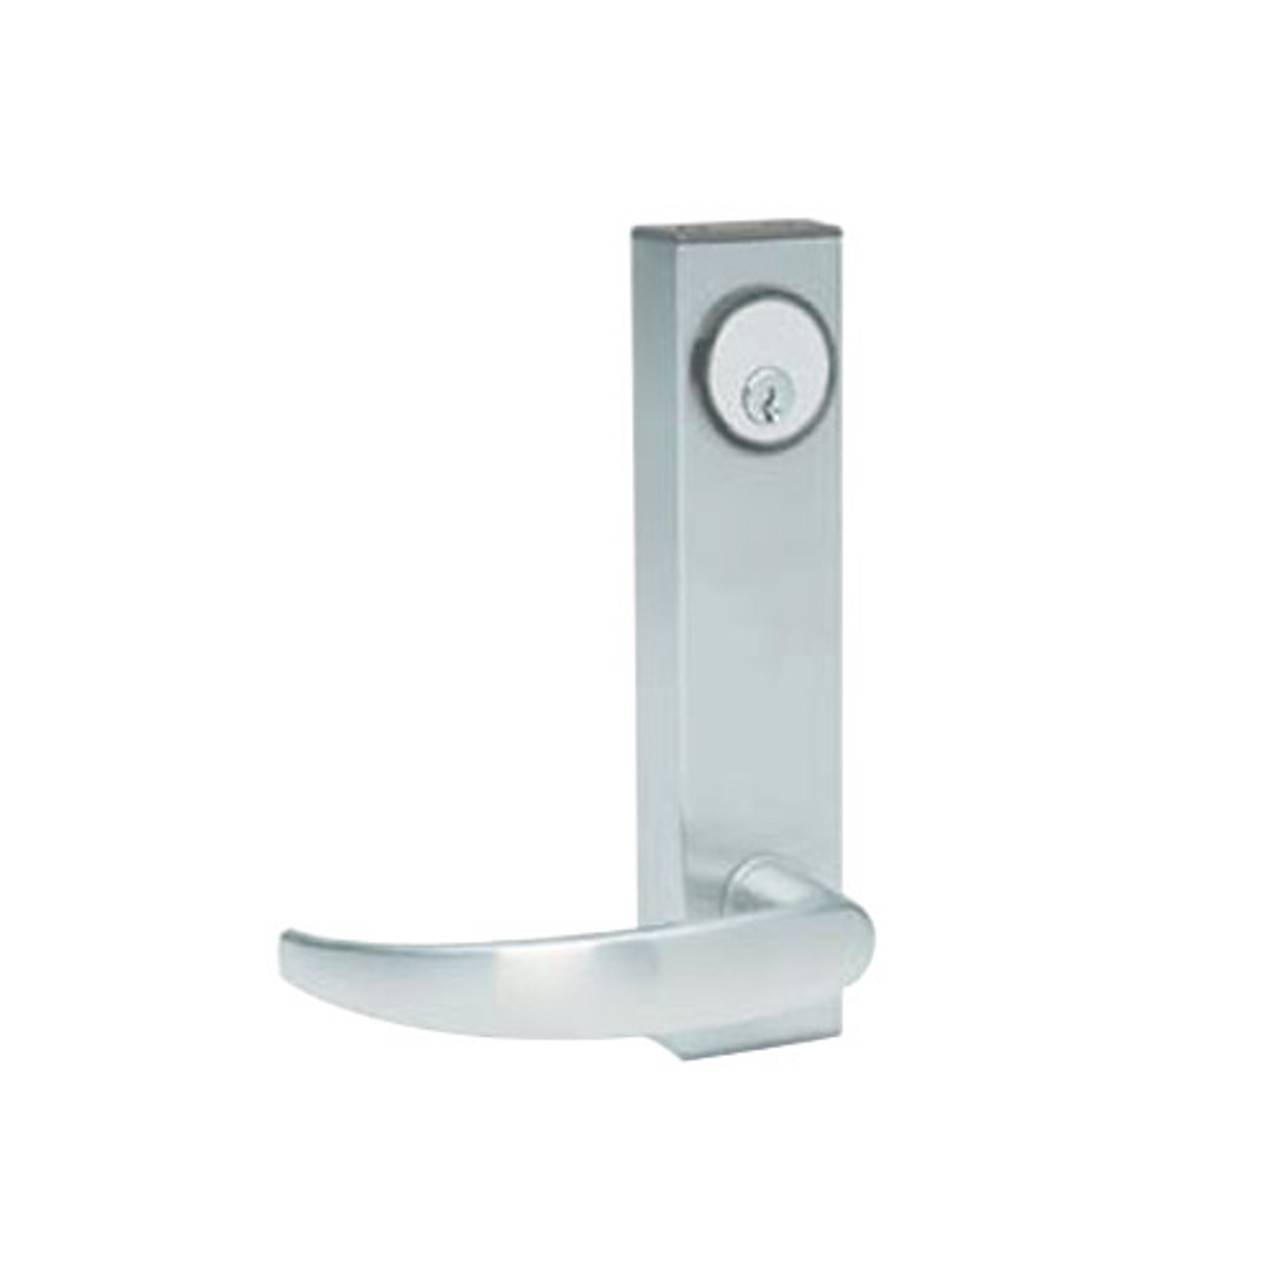 3080-01-0-94-US32 Adams Rite Standard Entry Trim with Curve Lever in Bright Stainless Finish